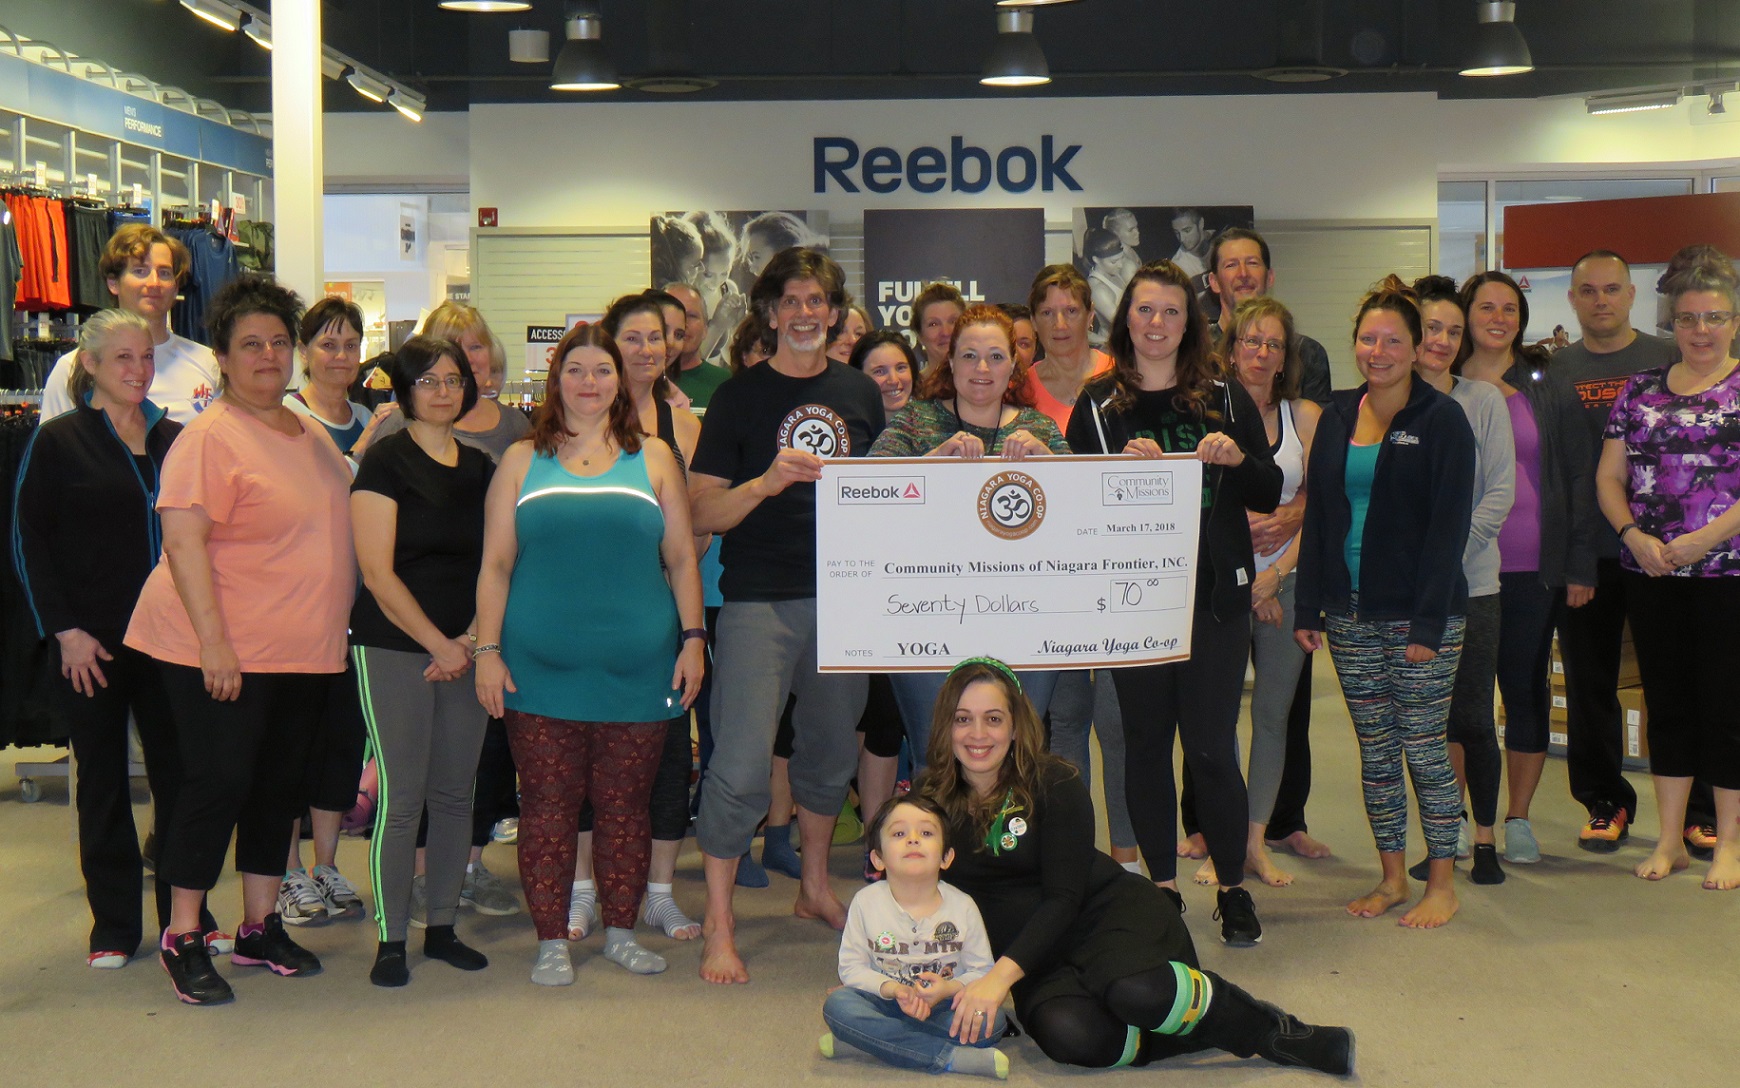 Members from Niagara Yoga Co-op's Saturday session pose for a photo following the event. Holding the check, from left, Brian Ball, Stacey Menard and Nicole Quarantillo. (Photo by David Yarger)